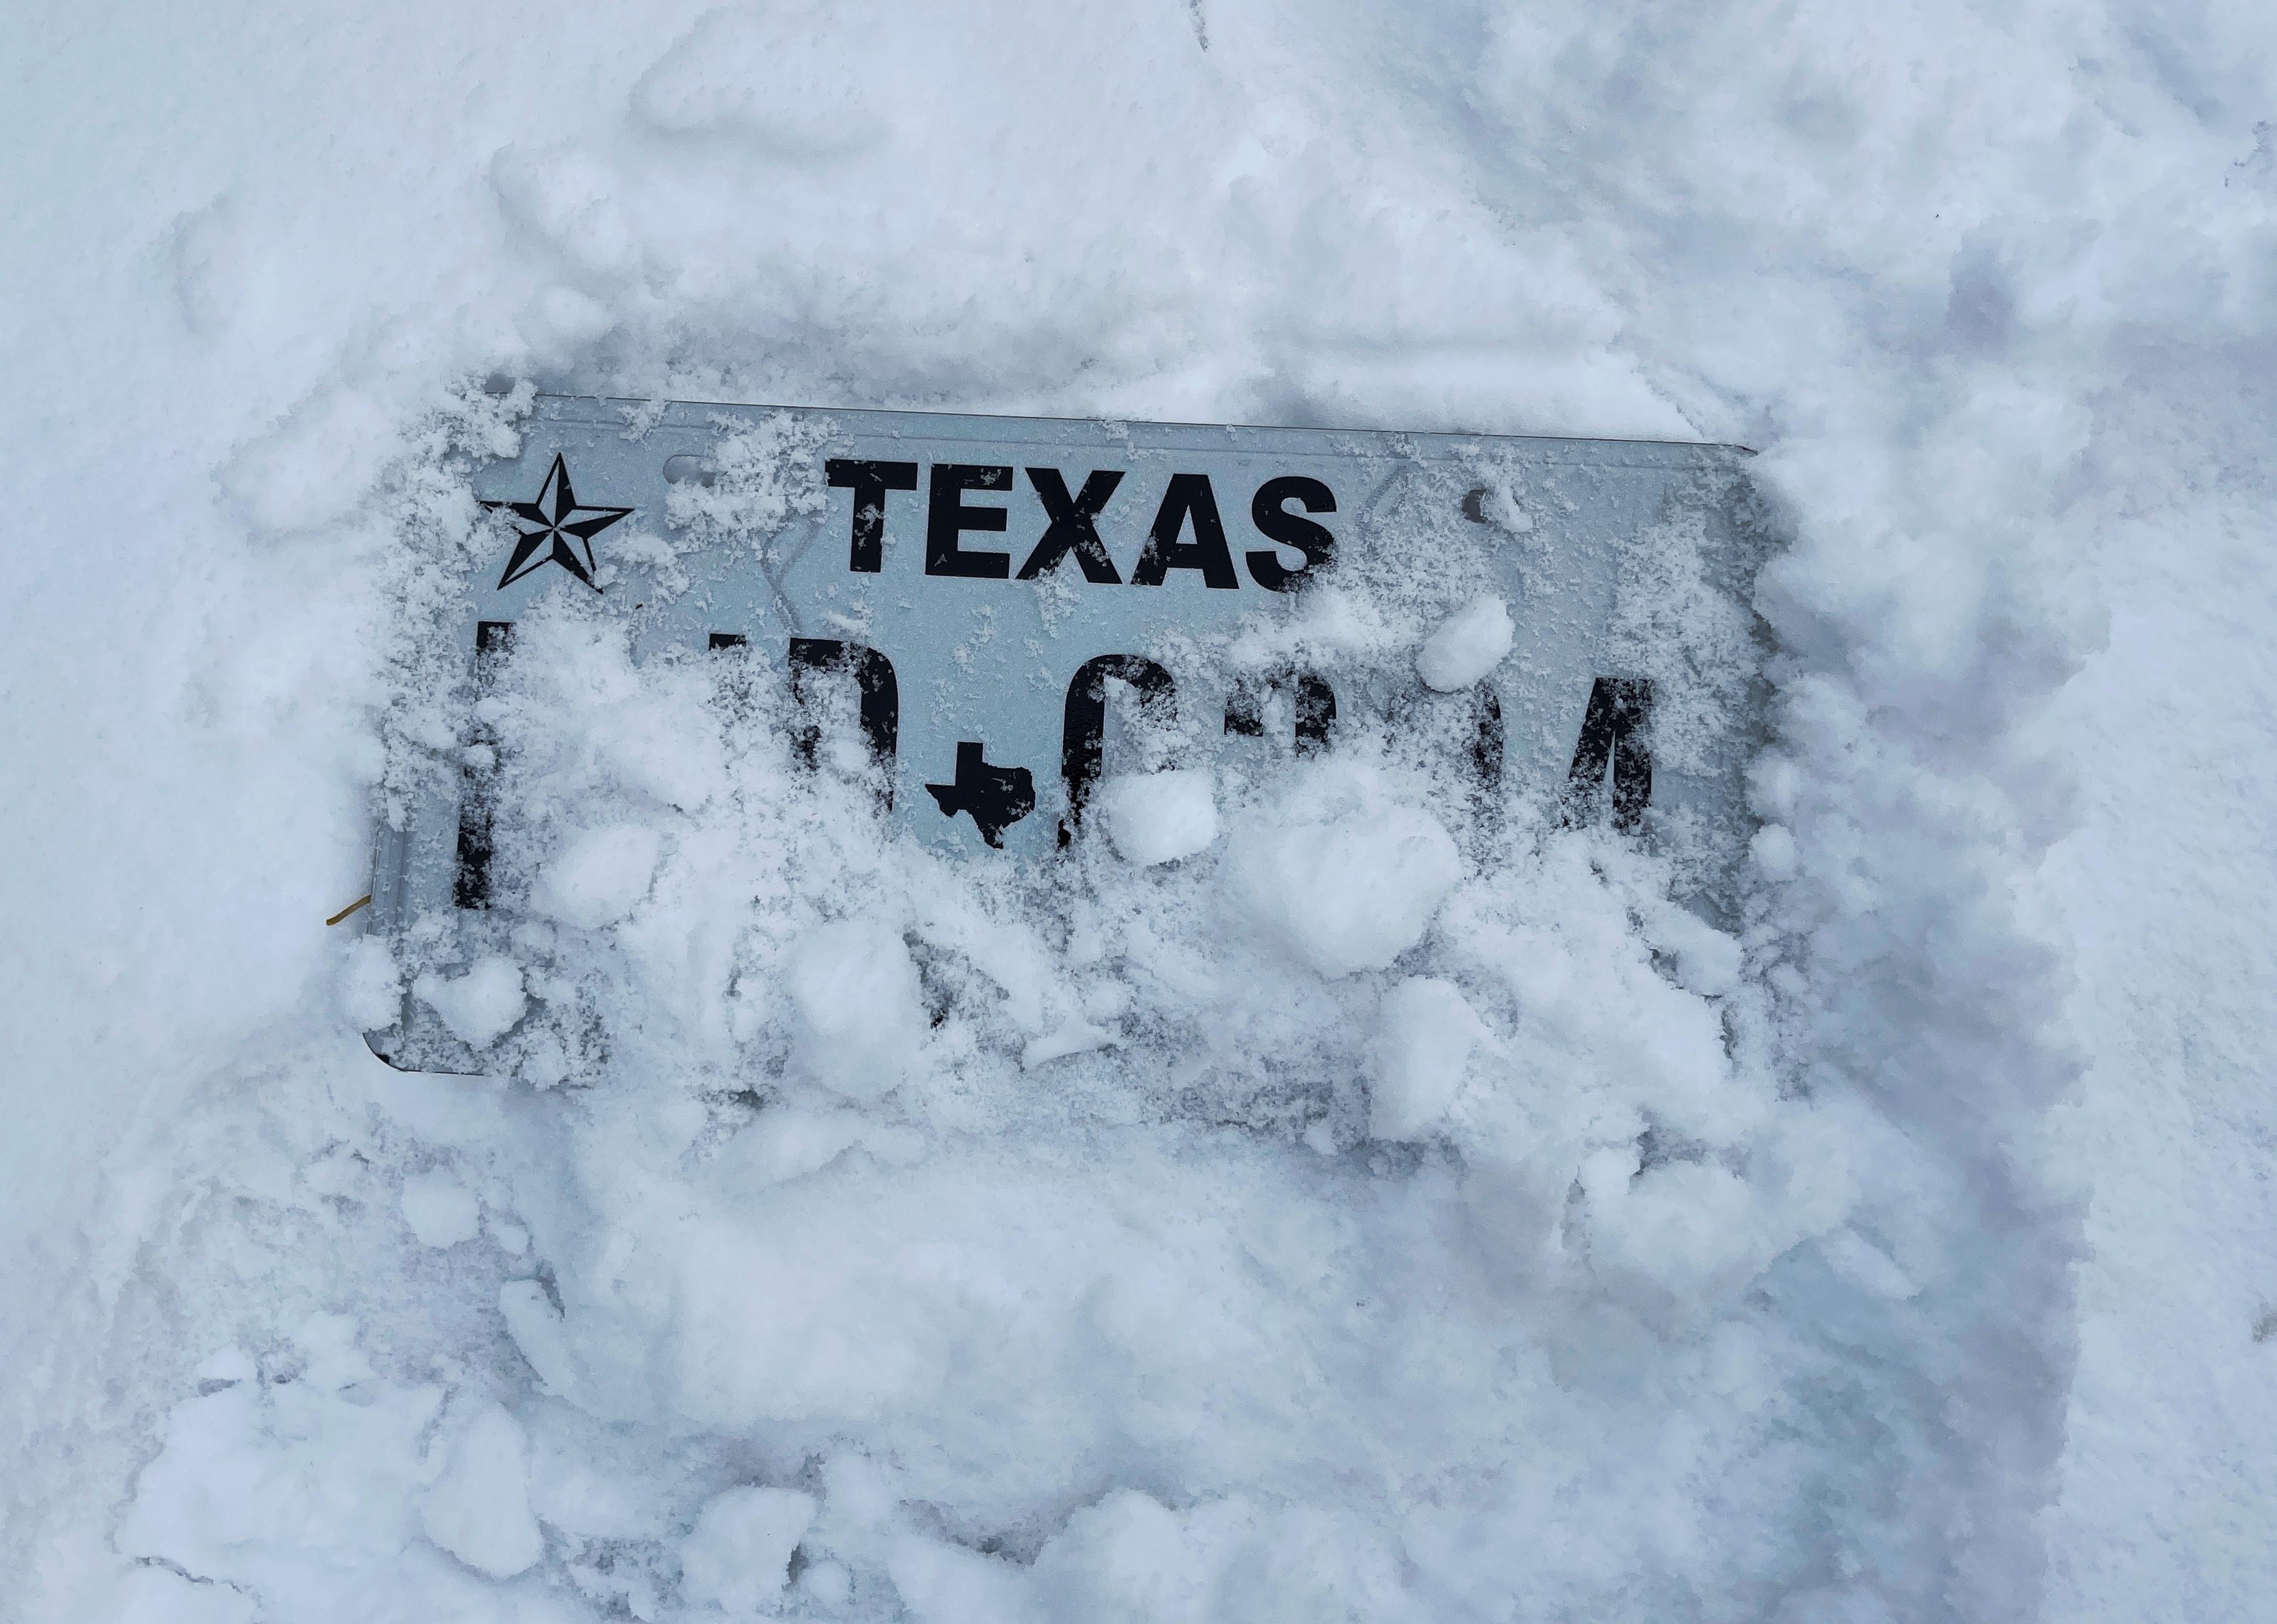 Texas license plate covered in snow.